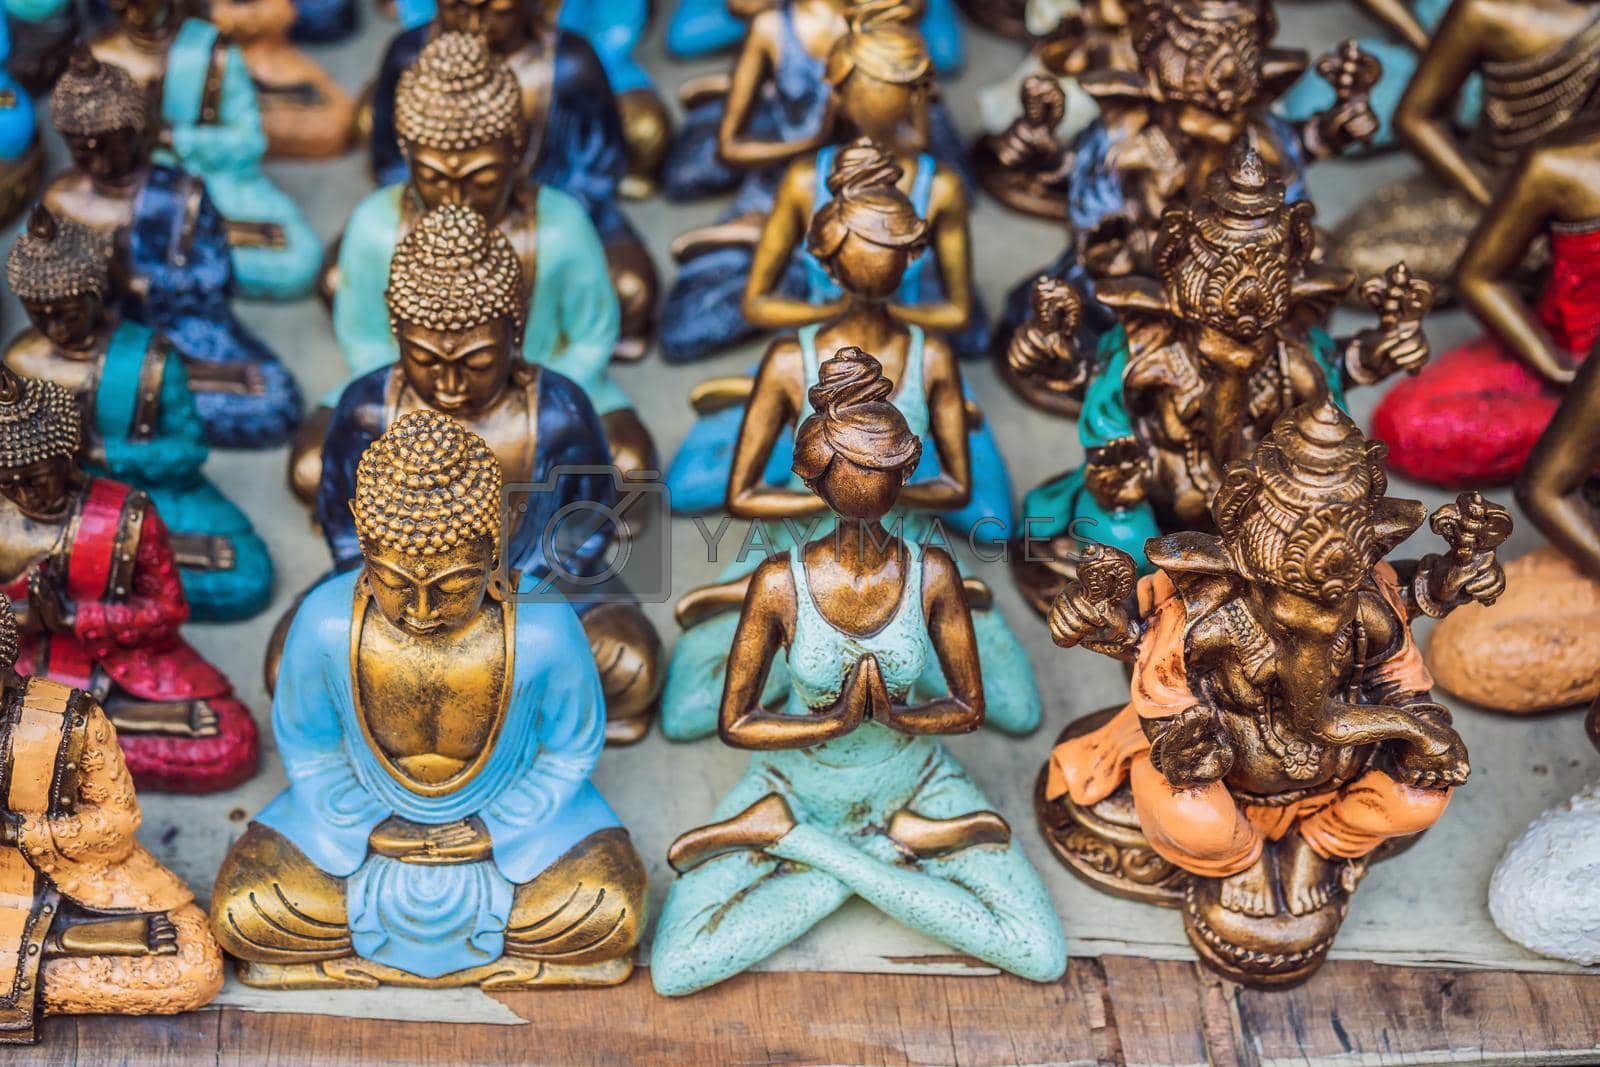 Royalty free image of Typical souvenir shop selling souvenirs and handicrafts of Bali at the famous Ubud Market, Indonesia. Balinese market. Souvenirs of wood and crafts of local residents by galitskaya